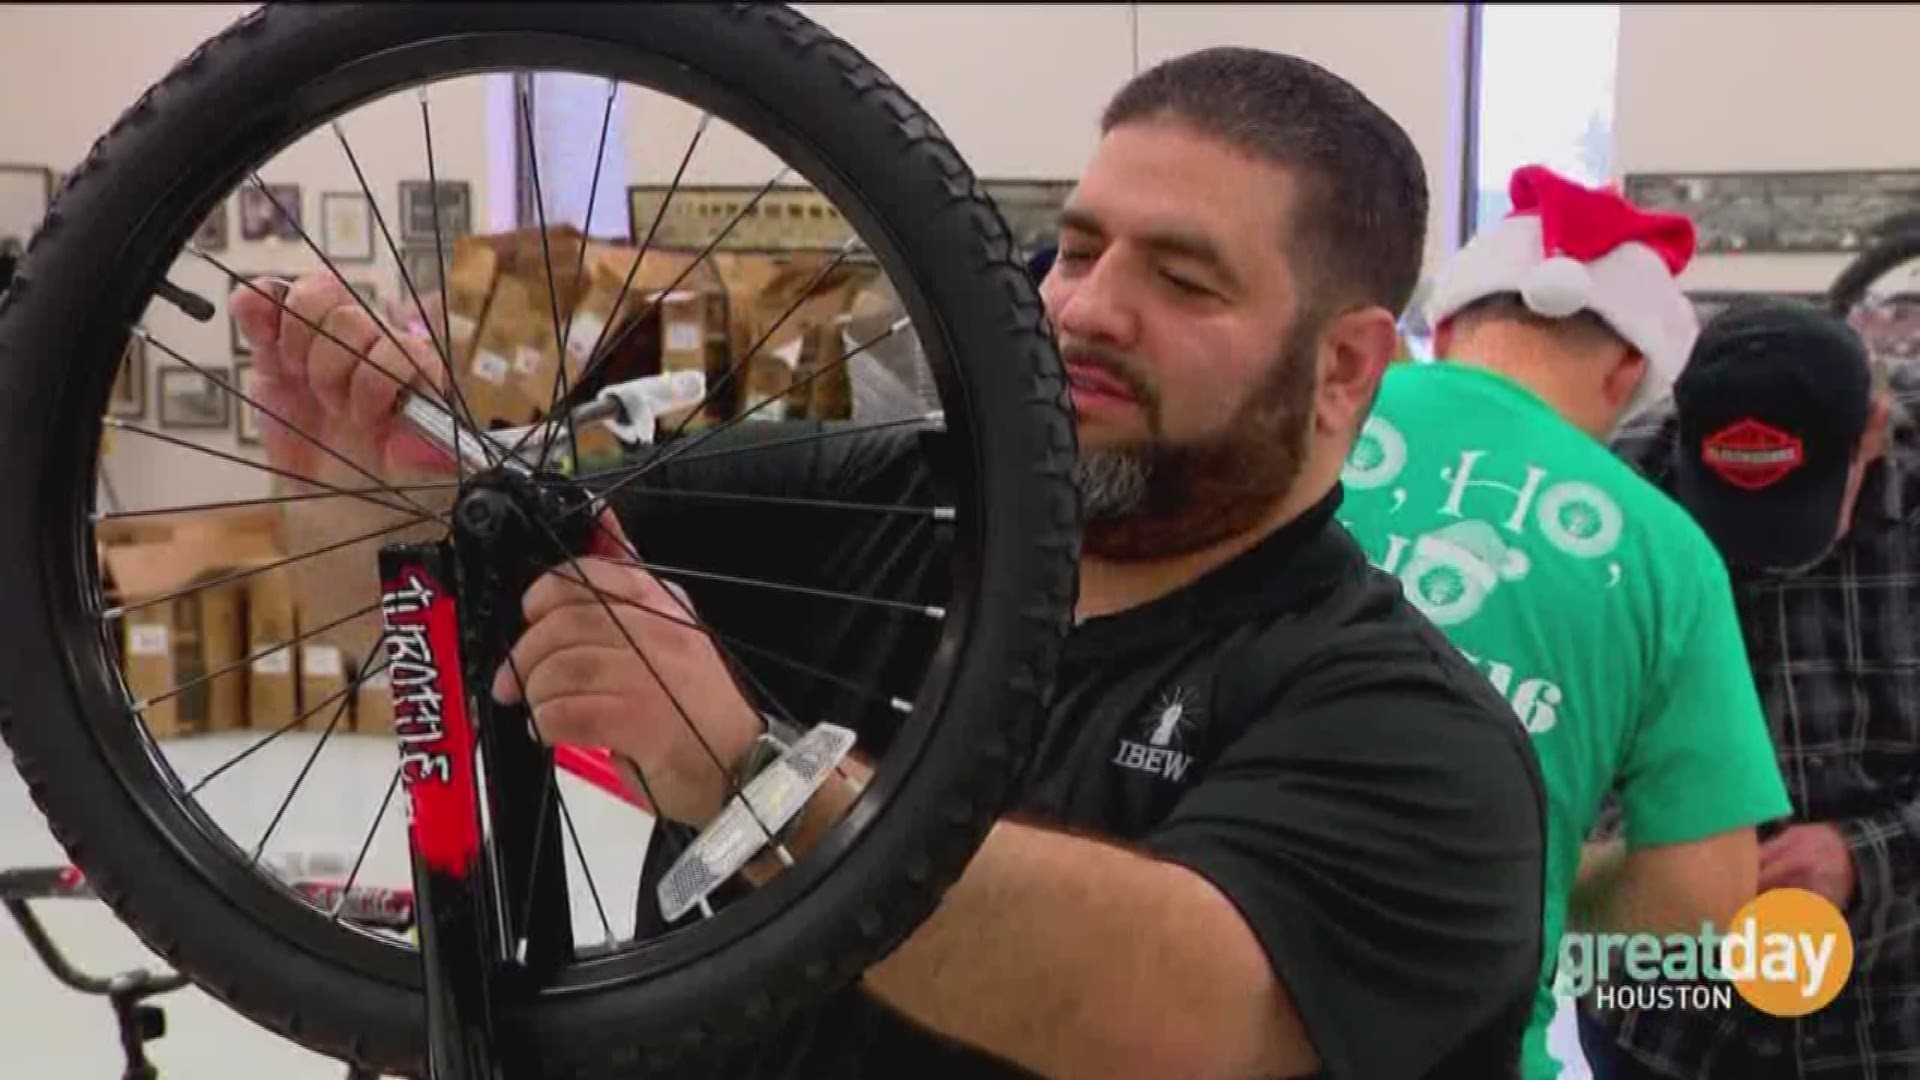 The International Brotherhood of Electrical Workers has teamed up with KHOU 11 to give kids the ride of their lives this holiday season.